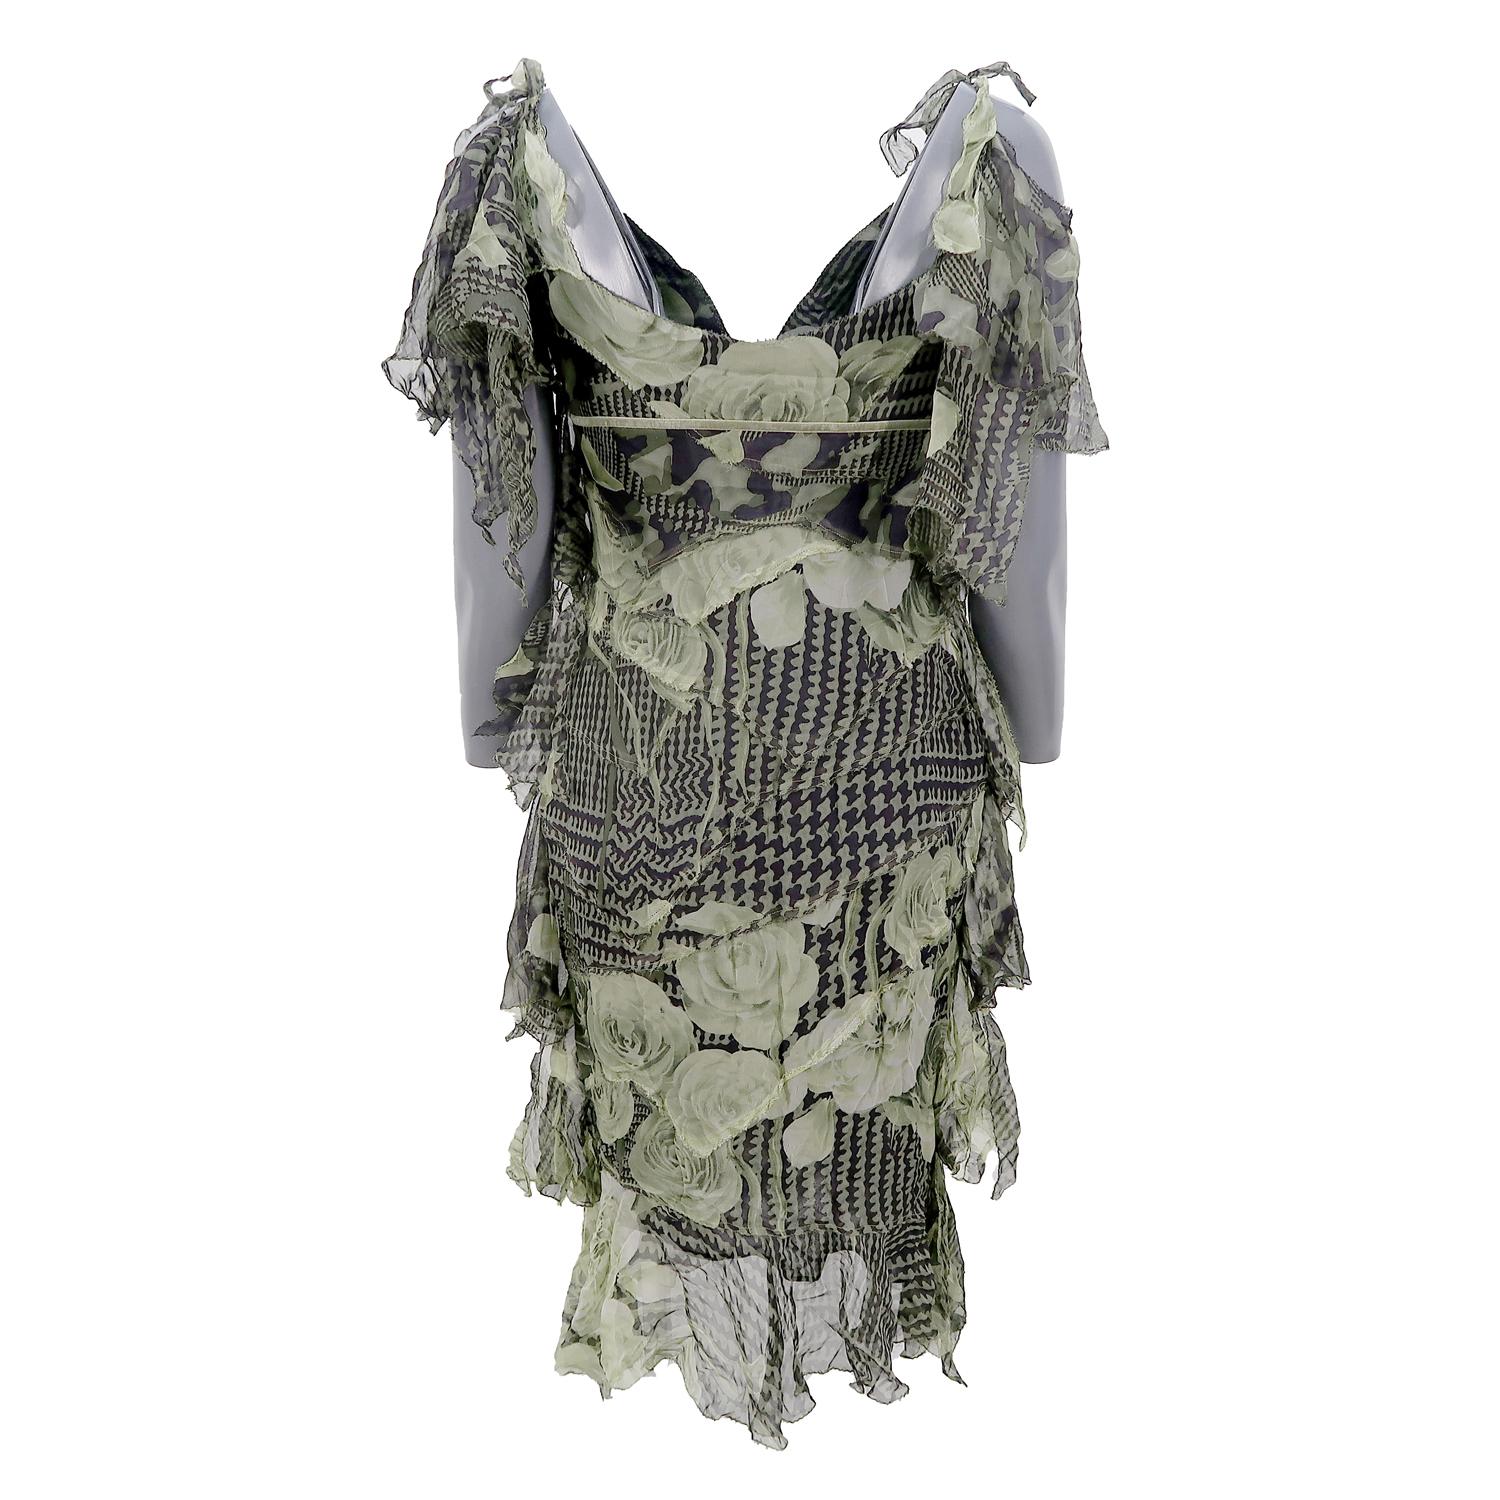 Antonio Berardi FW-2004 Silk Sleeveless Print Dress In Excellent Condition For Sale In Brussels, BE